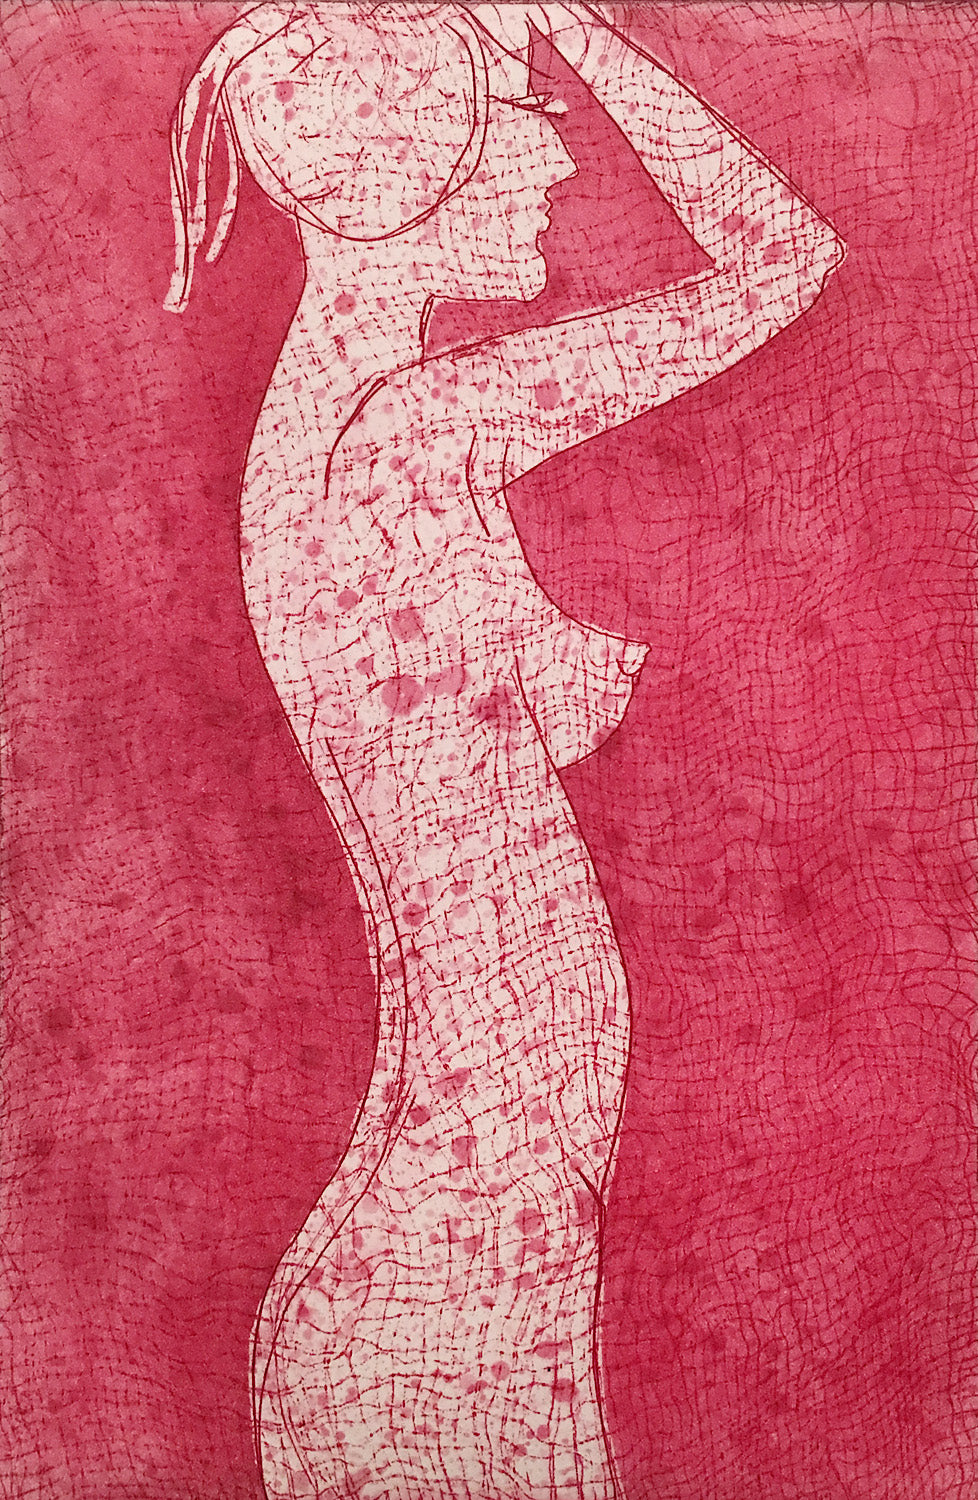 Indira Cesarine "Girl In Silhouette (Pink)" Limited Edition